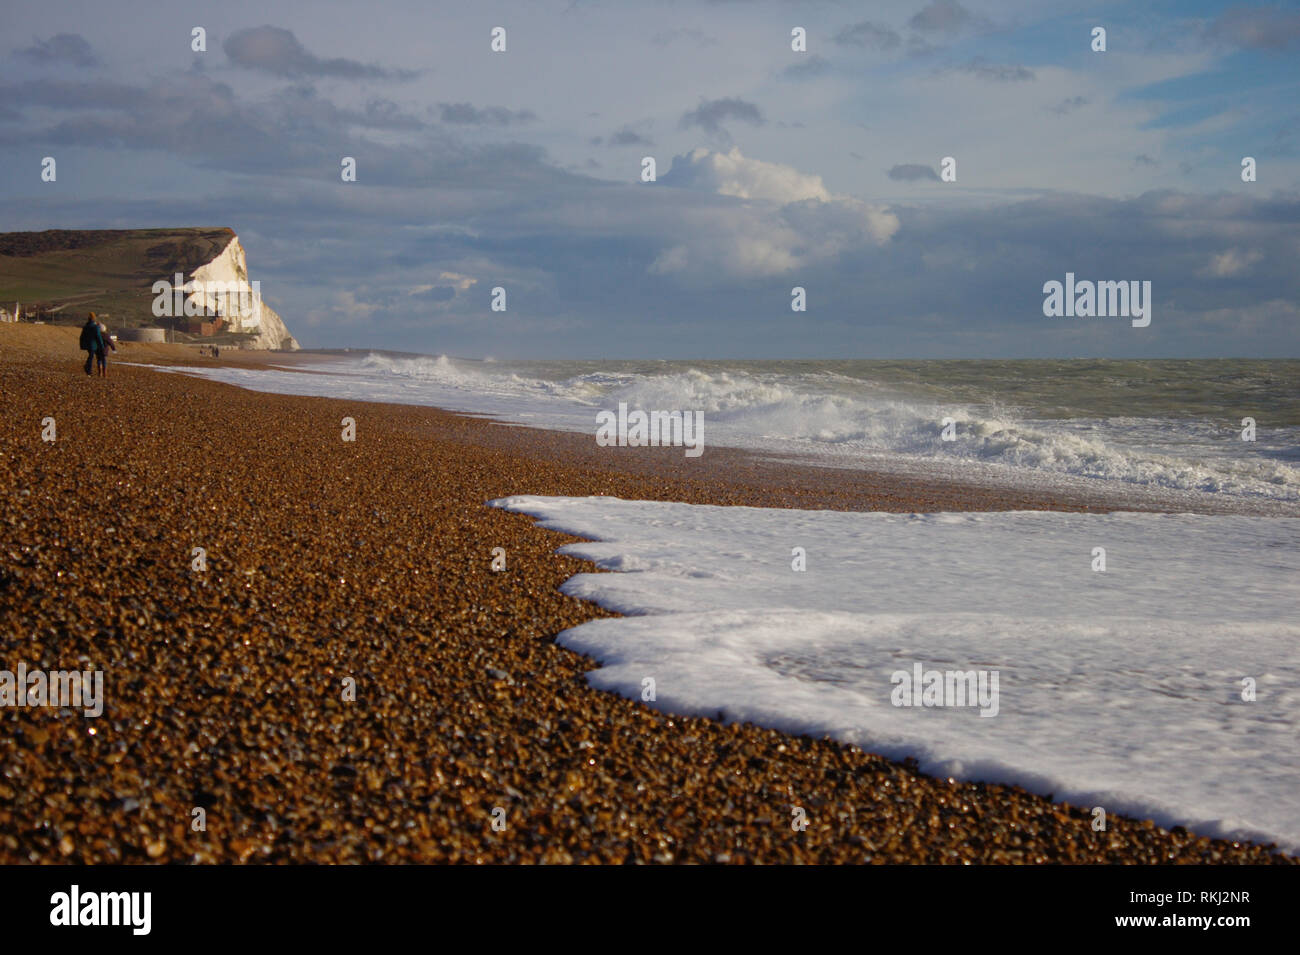 South England, Seaford stony beach. Wild sea. White cliffs (Seven sisters) in the background. Stock Photo